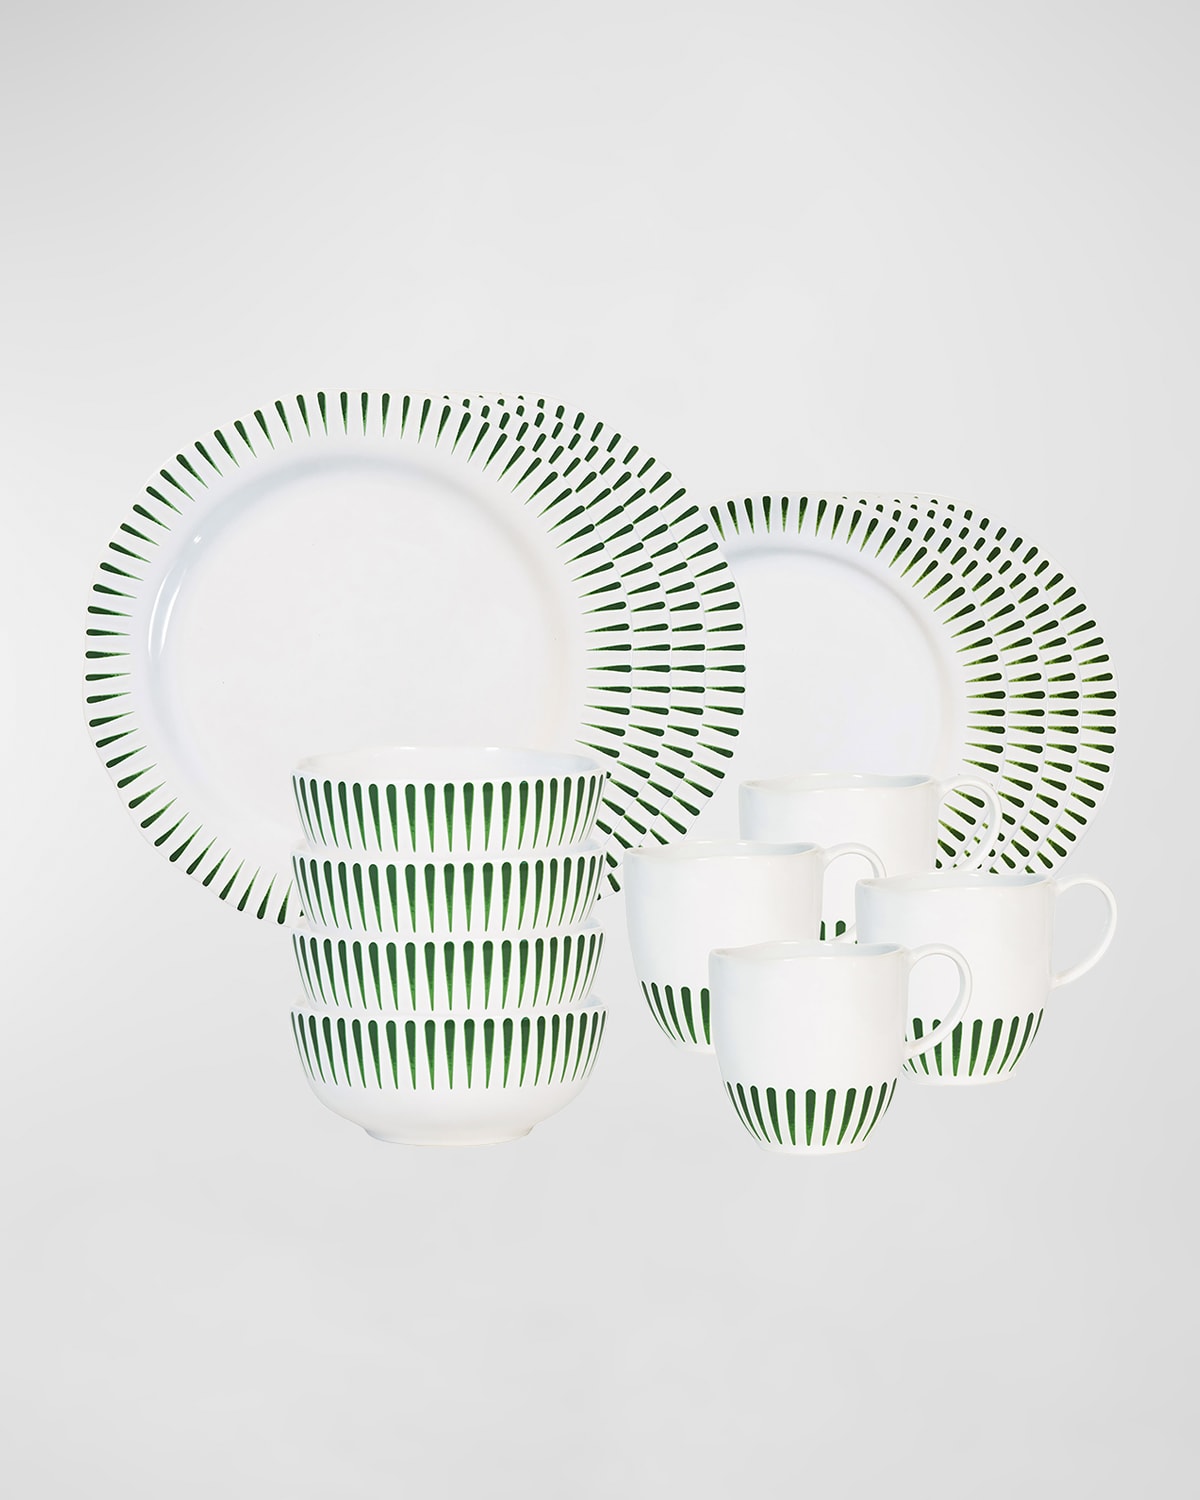 Sitio Stripe Basil 16-Piece Place Setting, Service for 4